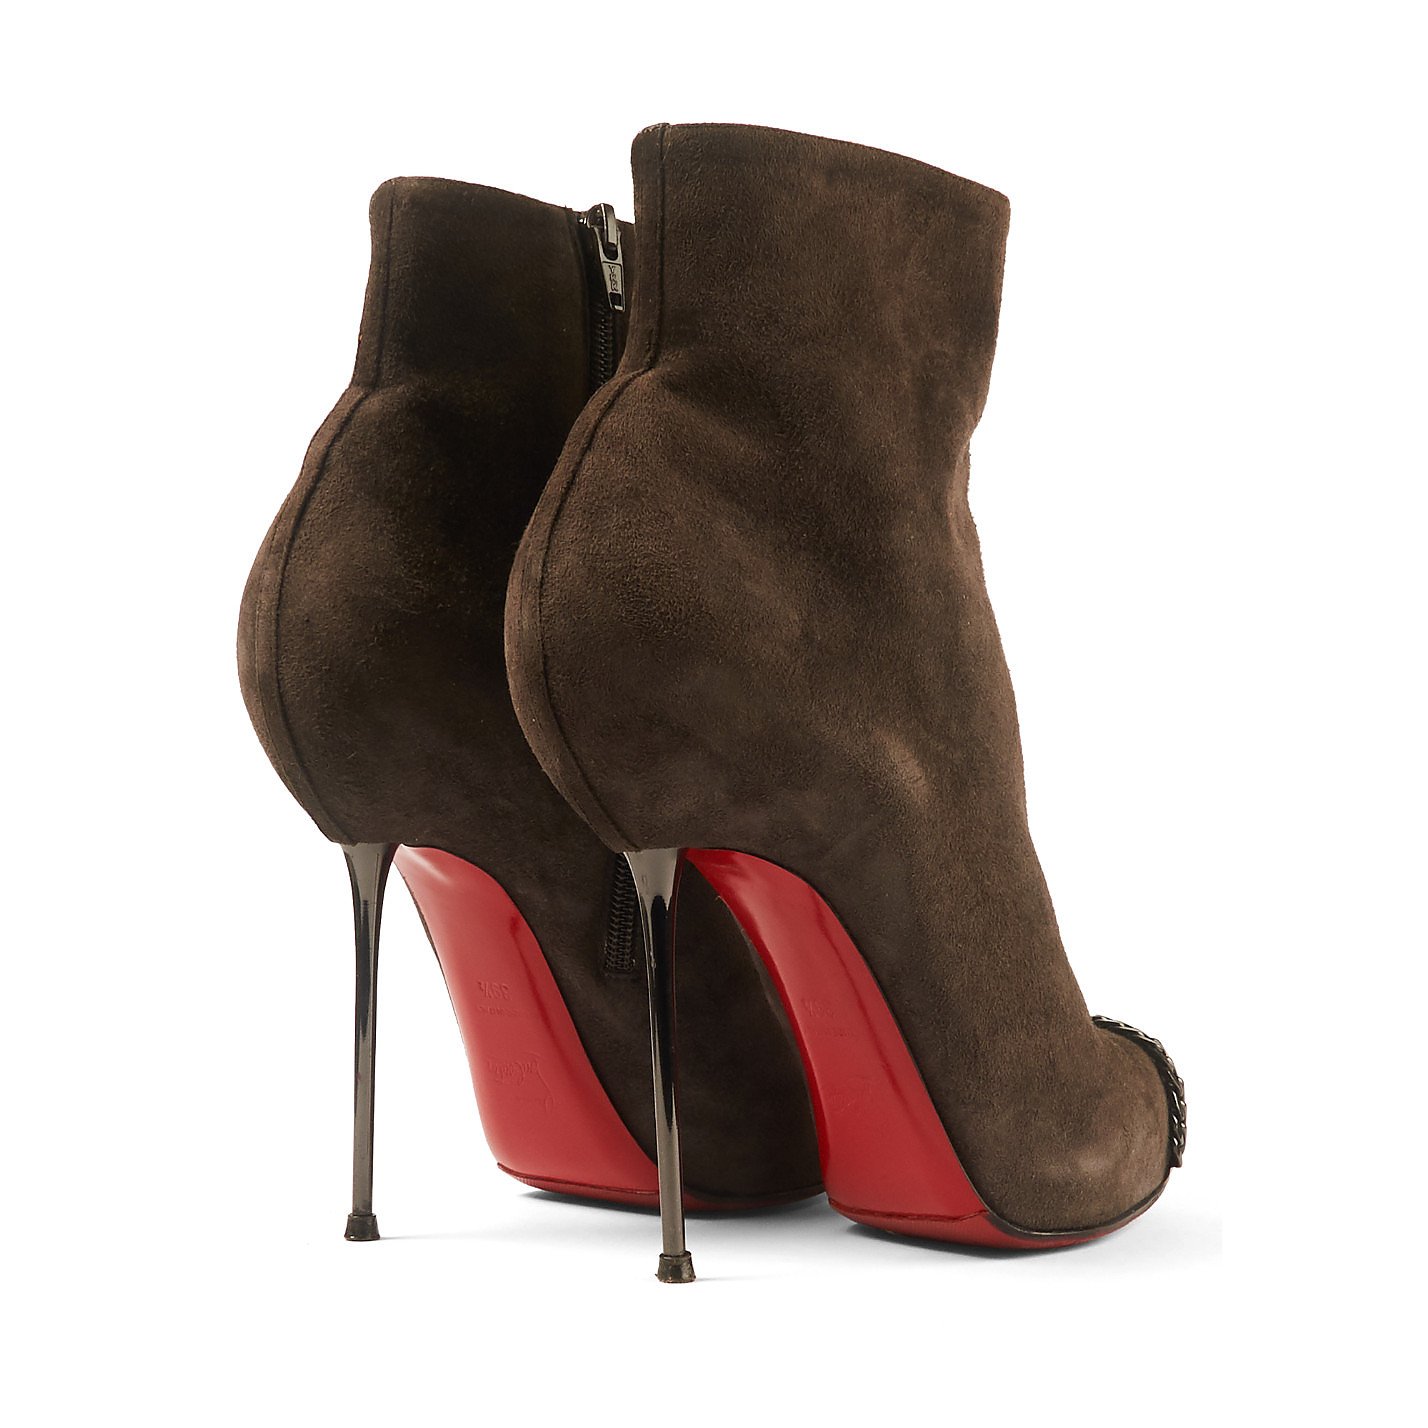 Christian Louboutin Suede Stiletto Ankle Boots